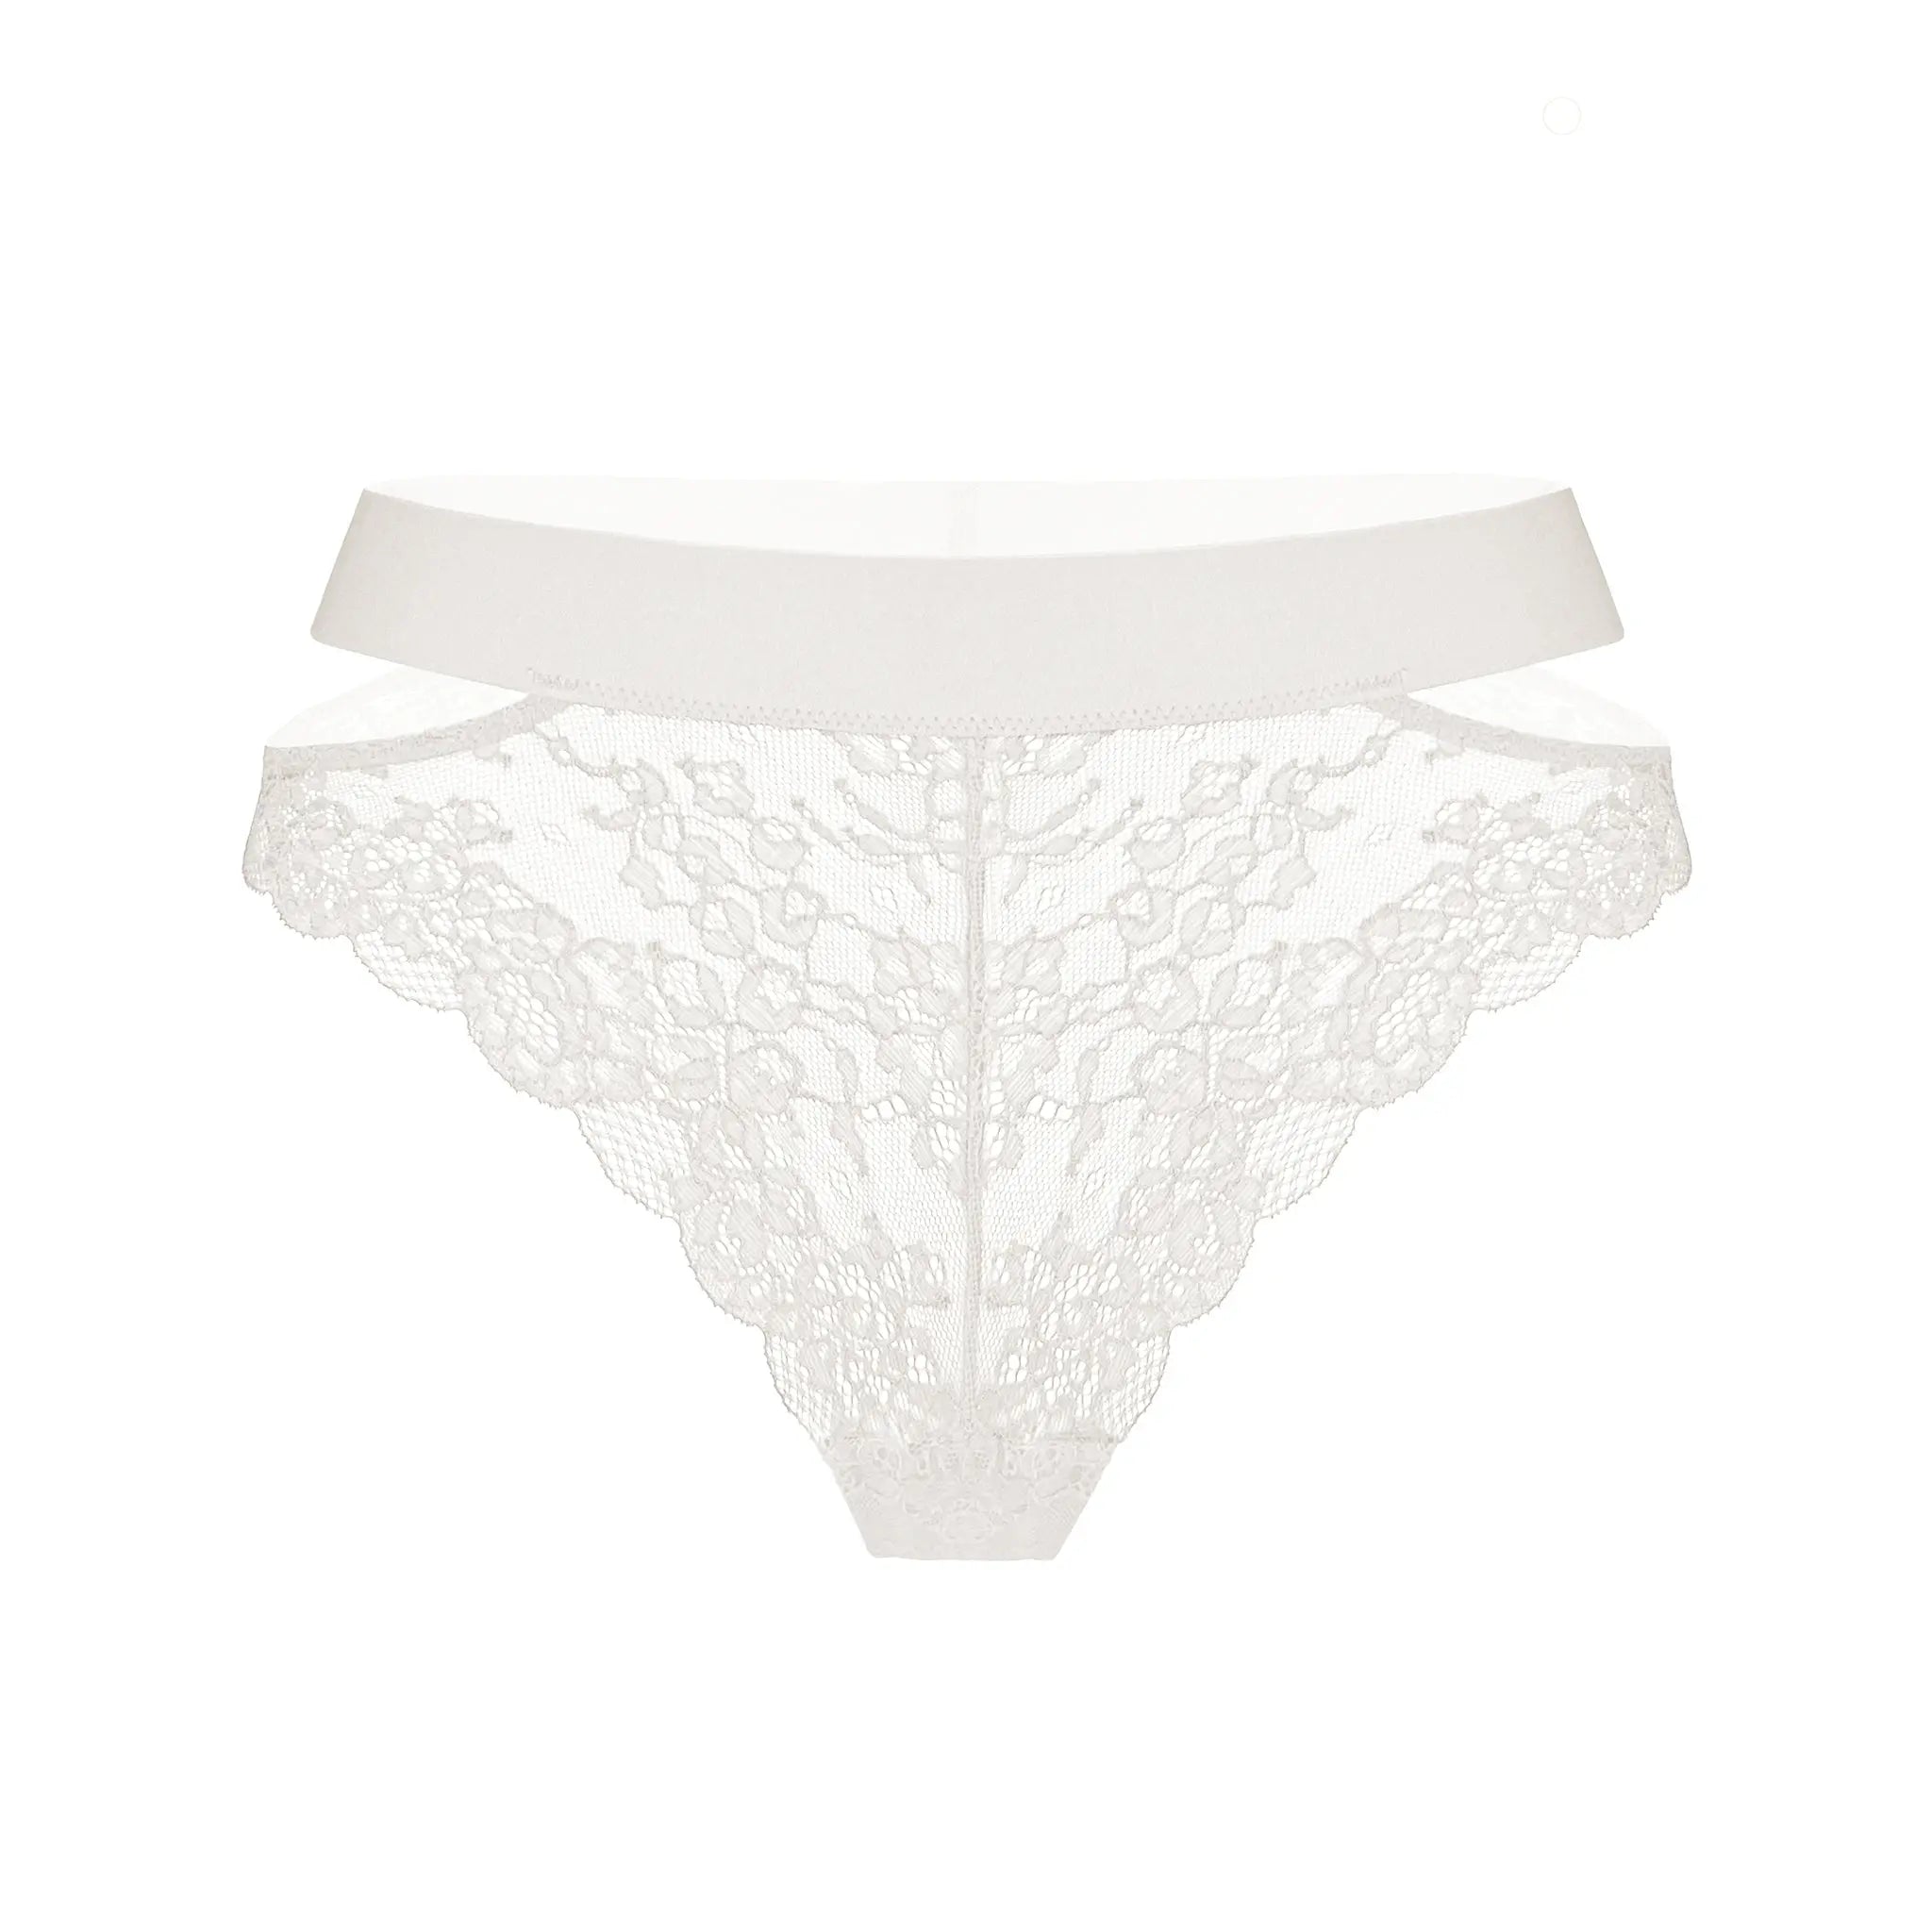 Wild Lace Cheeky Crystal - Monique Morin Lingerie